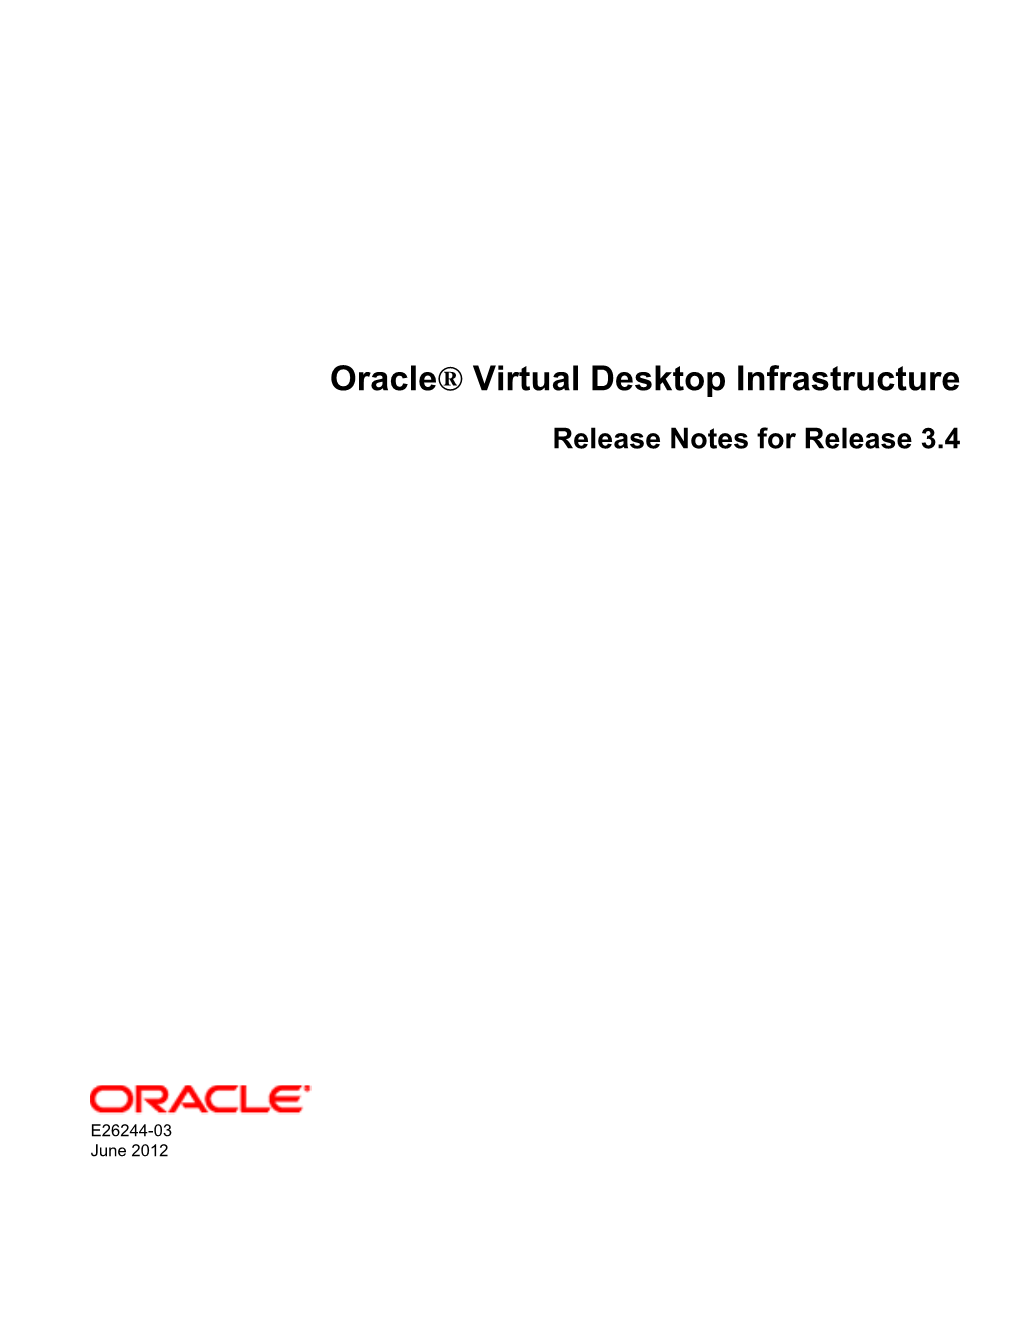 Oracle® Virtual Desktop Infrastructure Release Notes for Release 3.4